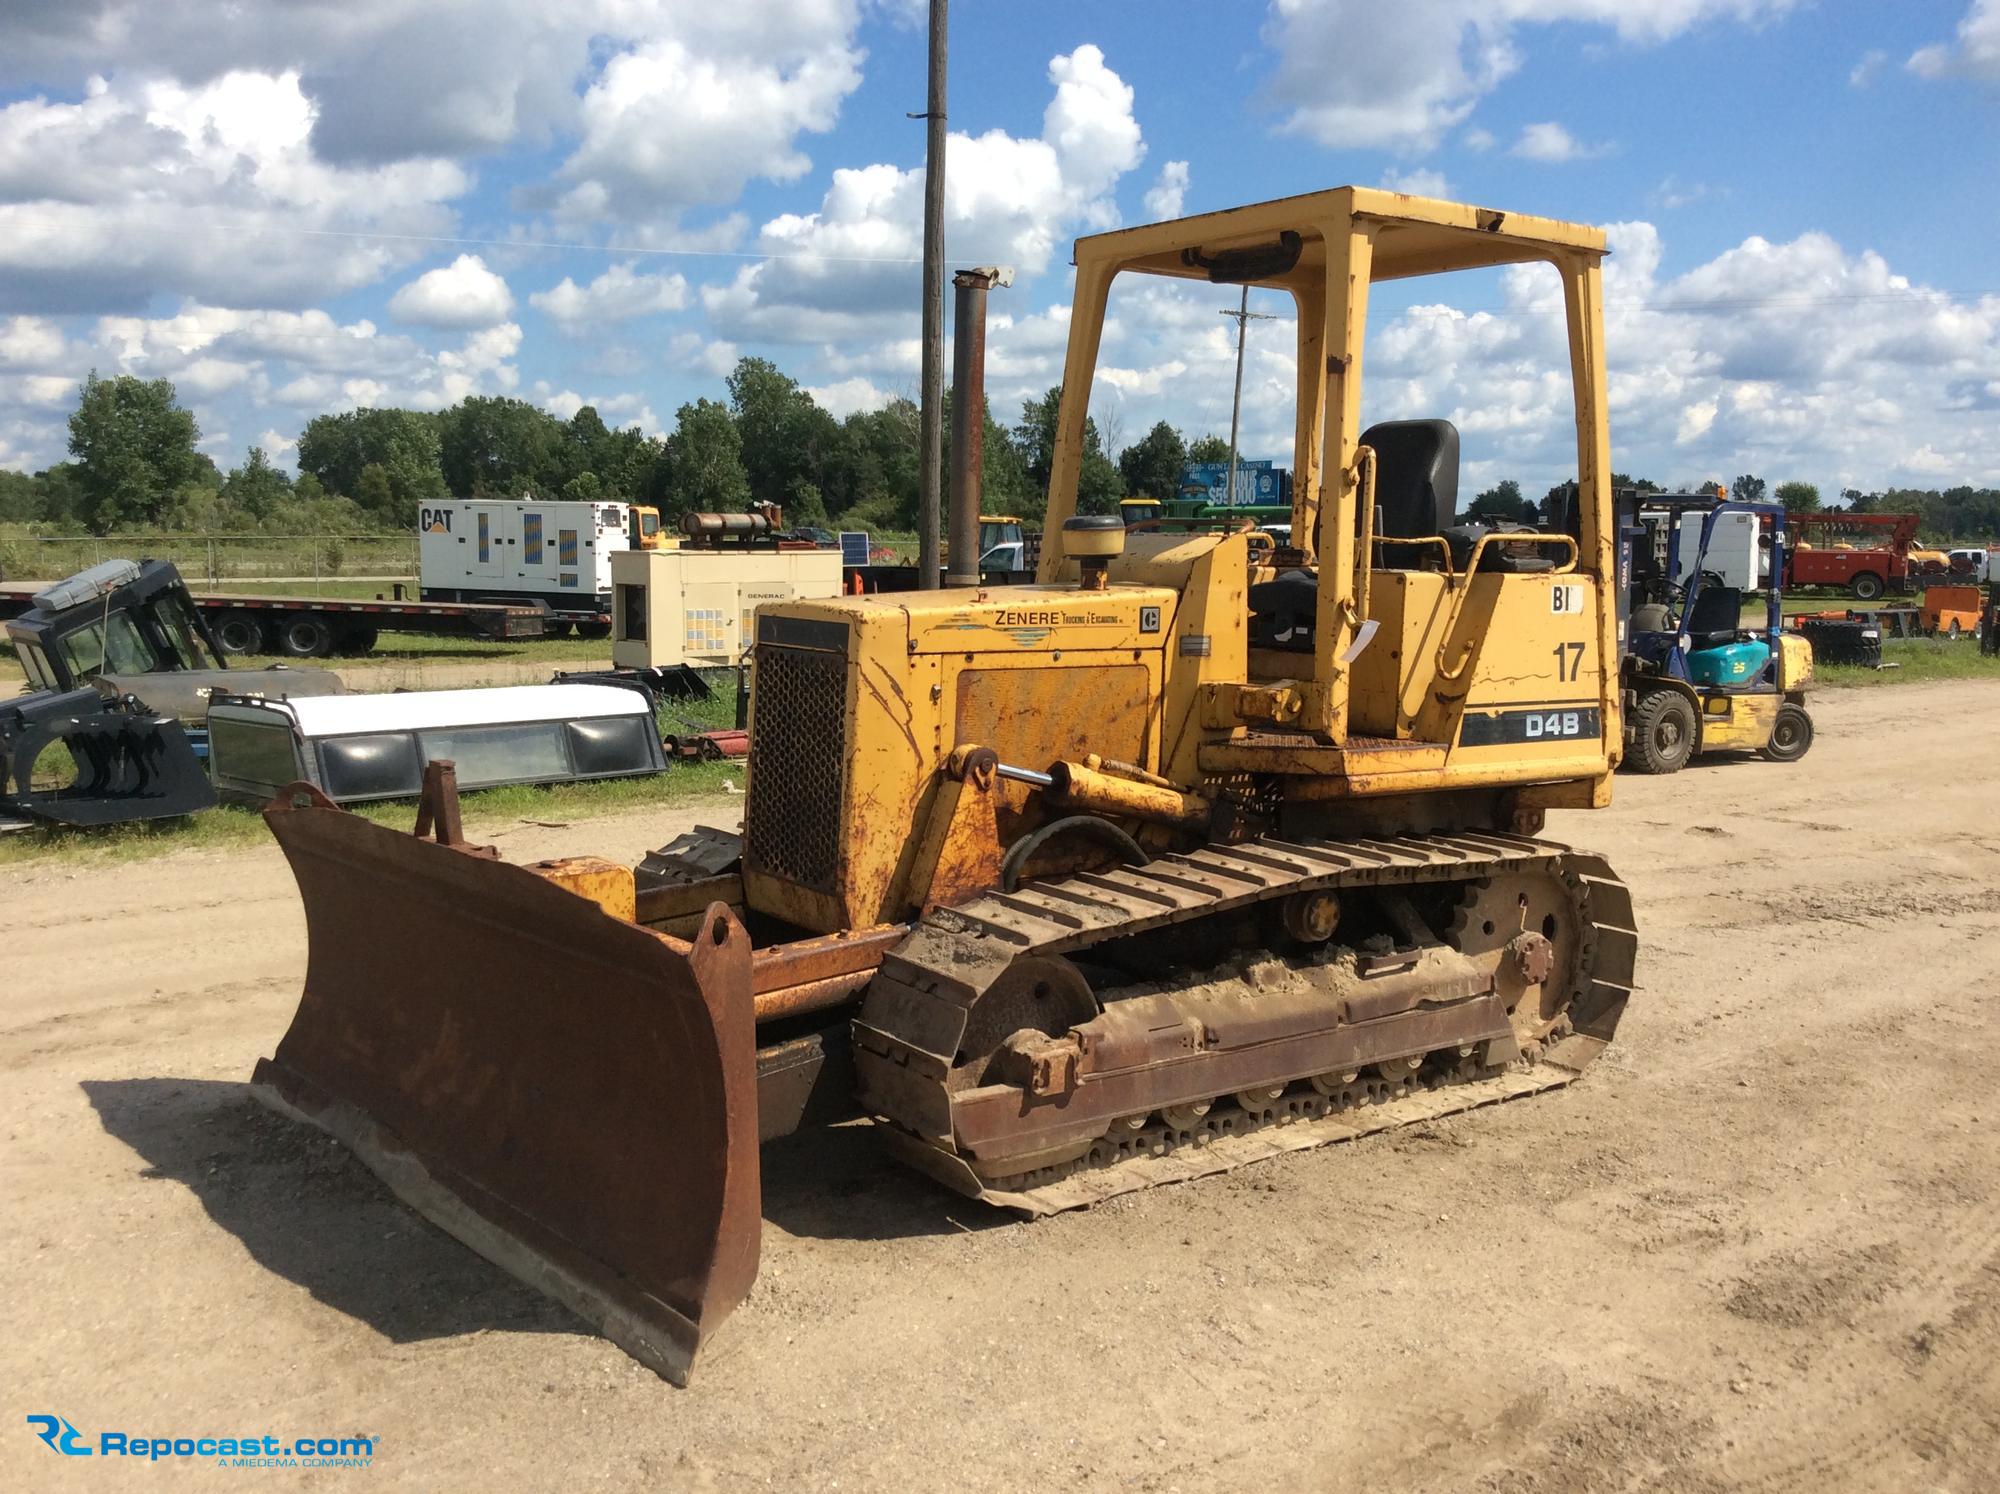 Construction Equipment For Sale!